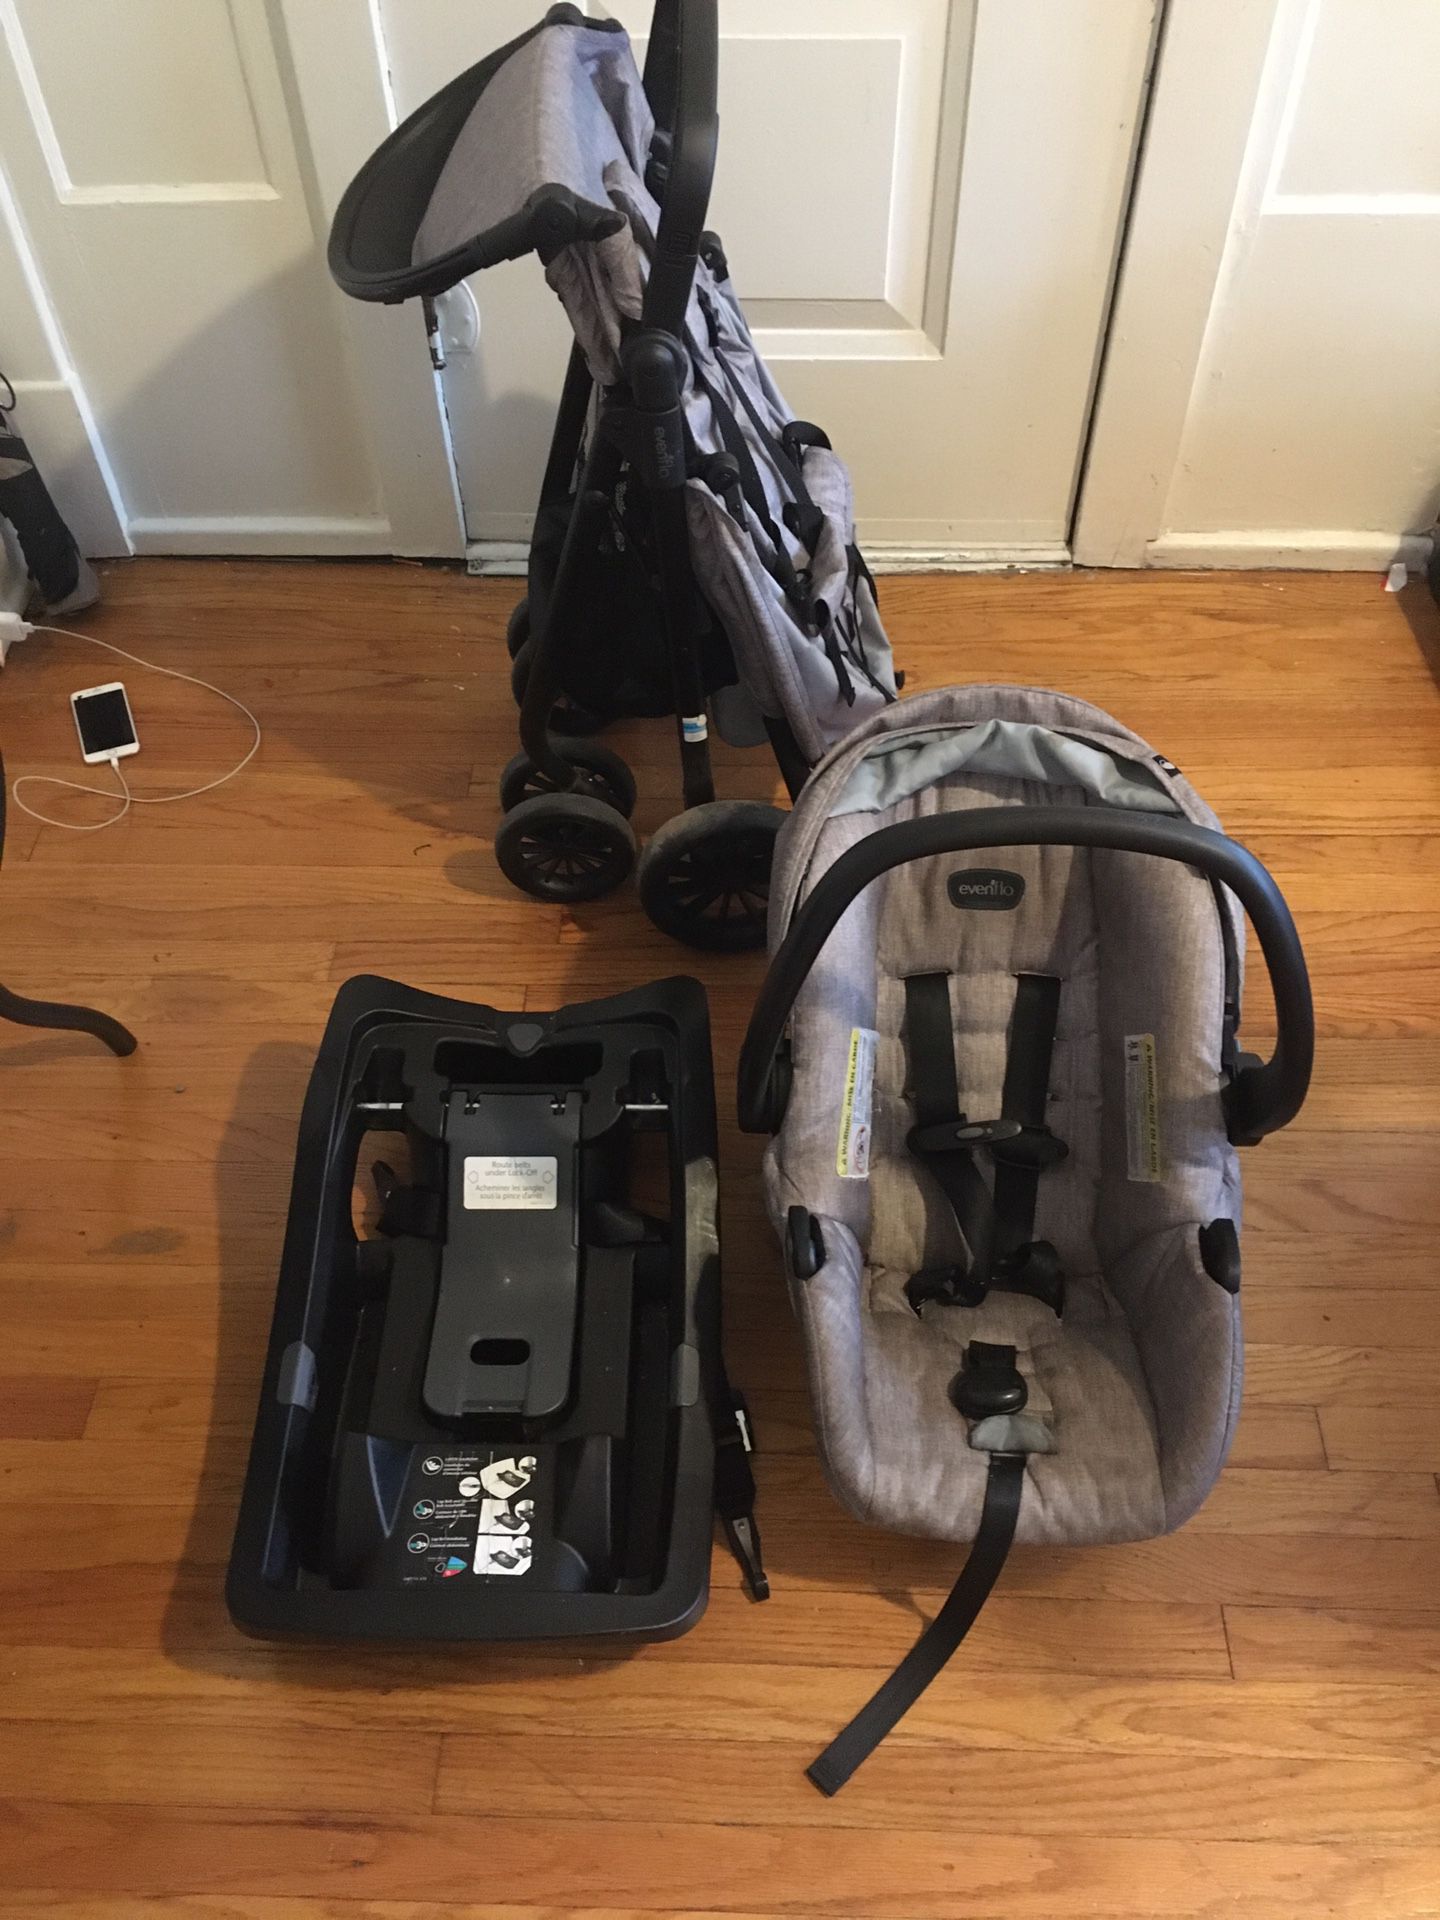 Evenflo Sibby Travel System with LiteMax 35 Infant Car Seat